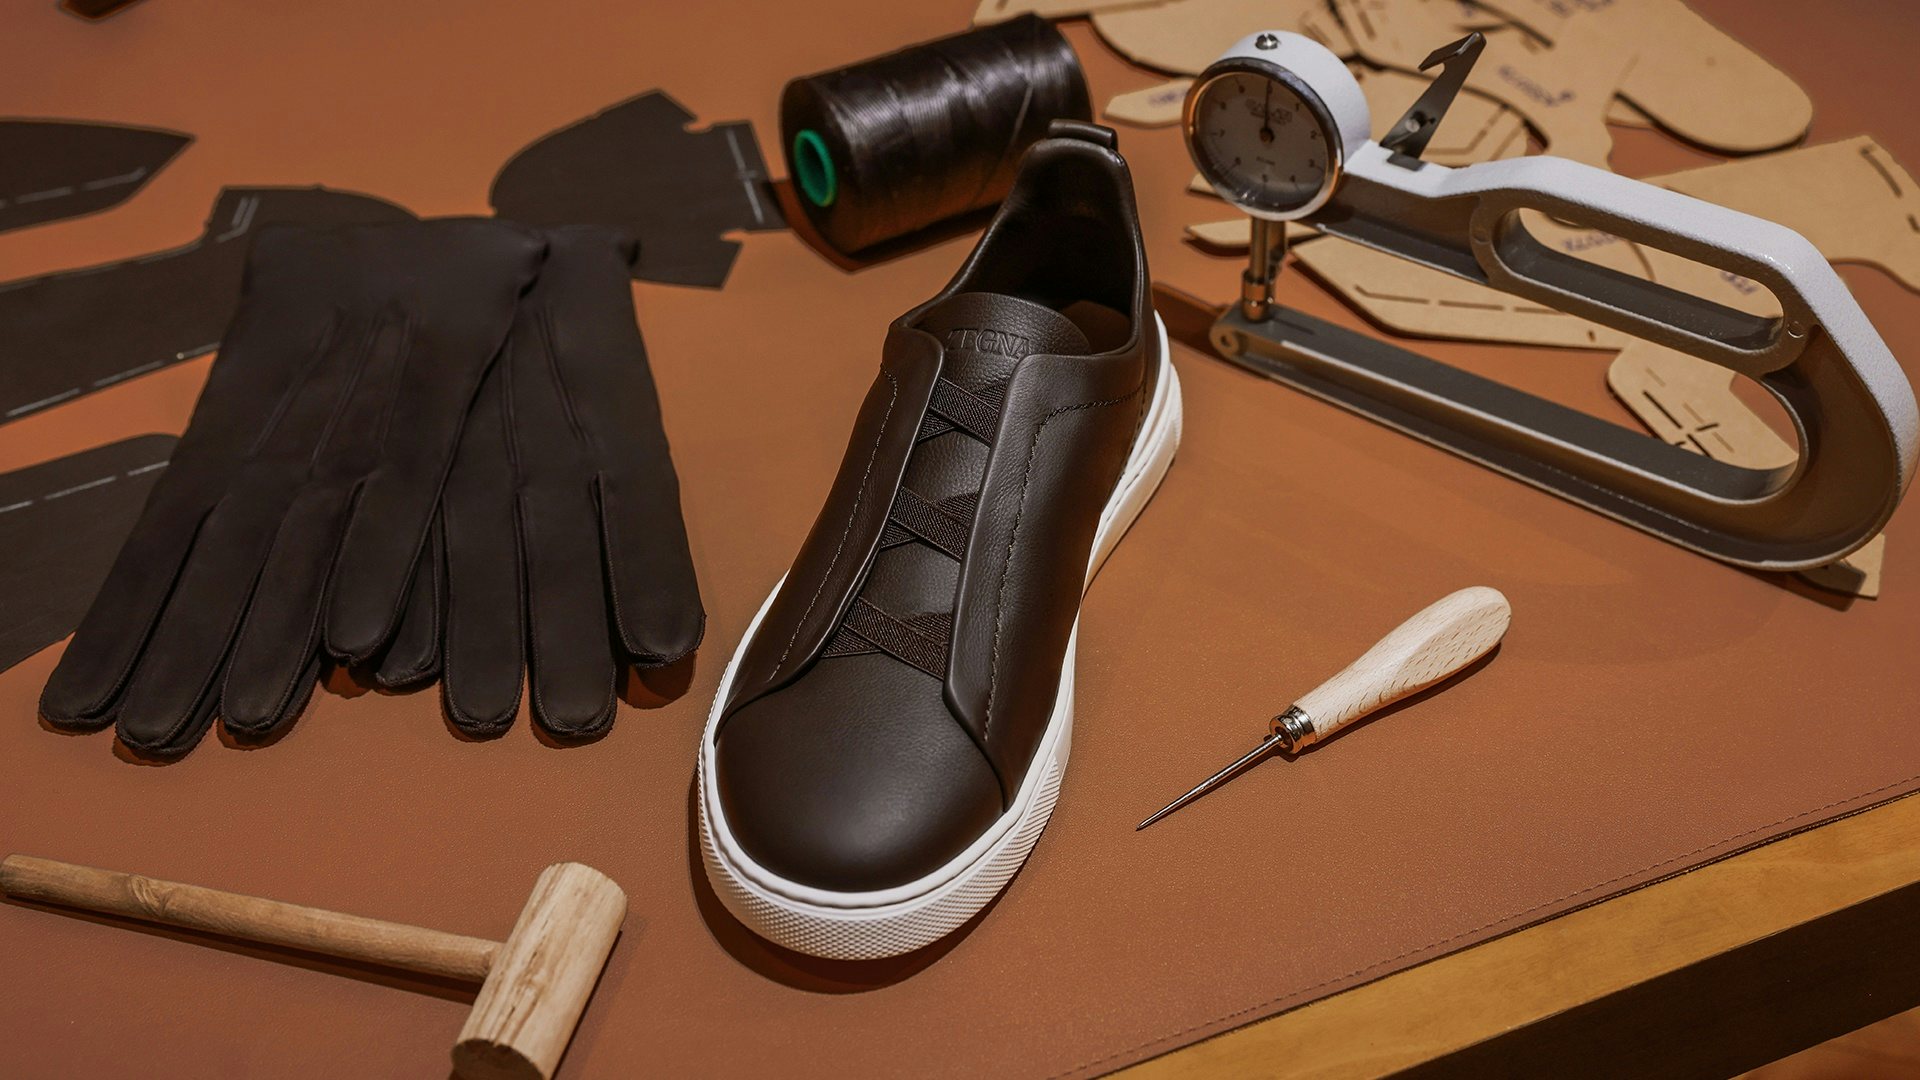 The epitome of quiet luxury and comfort, the new Triple Stitch Secondskin Luxury Leisurewear Shoes are designed to “fit like a glove.” Photo: Zegna